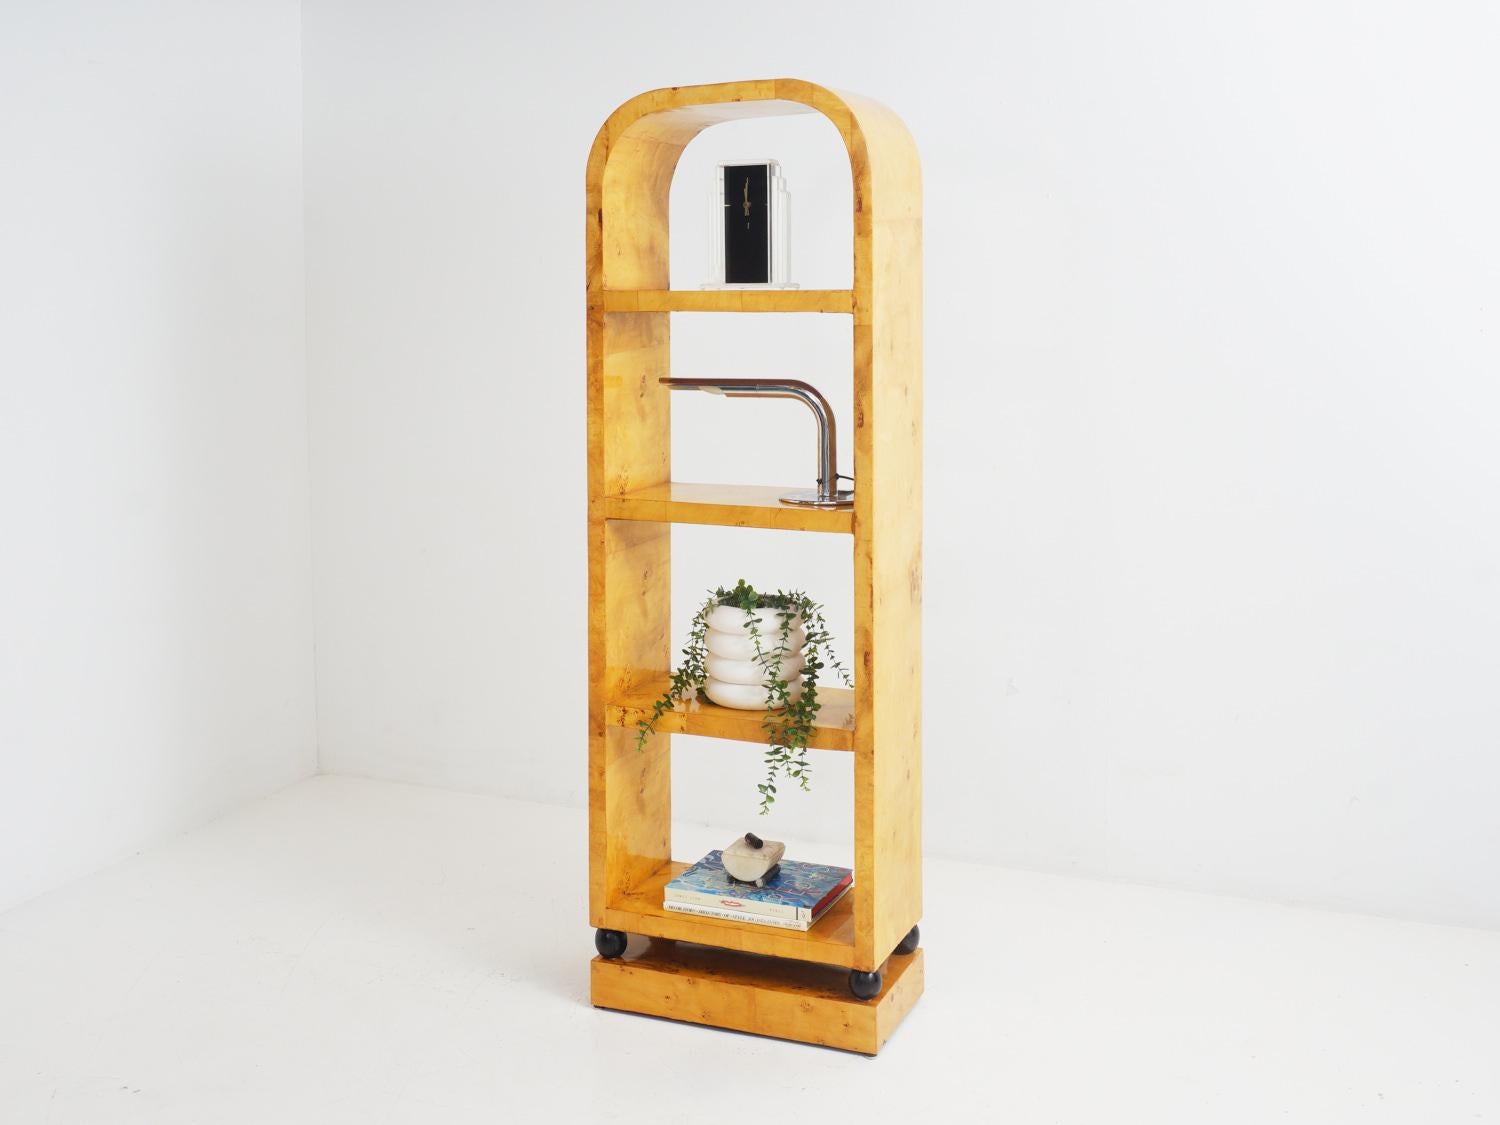 Picture this: an Art Deco dream brought to life in the form of a burlwood open etagere! Graceful curves and lustrous wood blend seamlessly to create a show-stopping display. Flaunt your cherished mementos while channeling your inner roaring 1920's